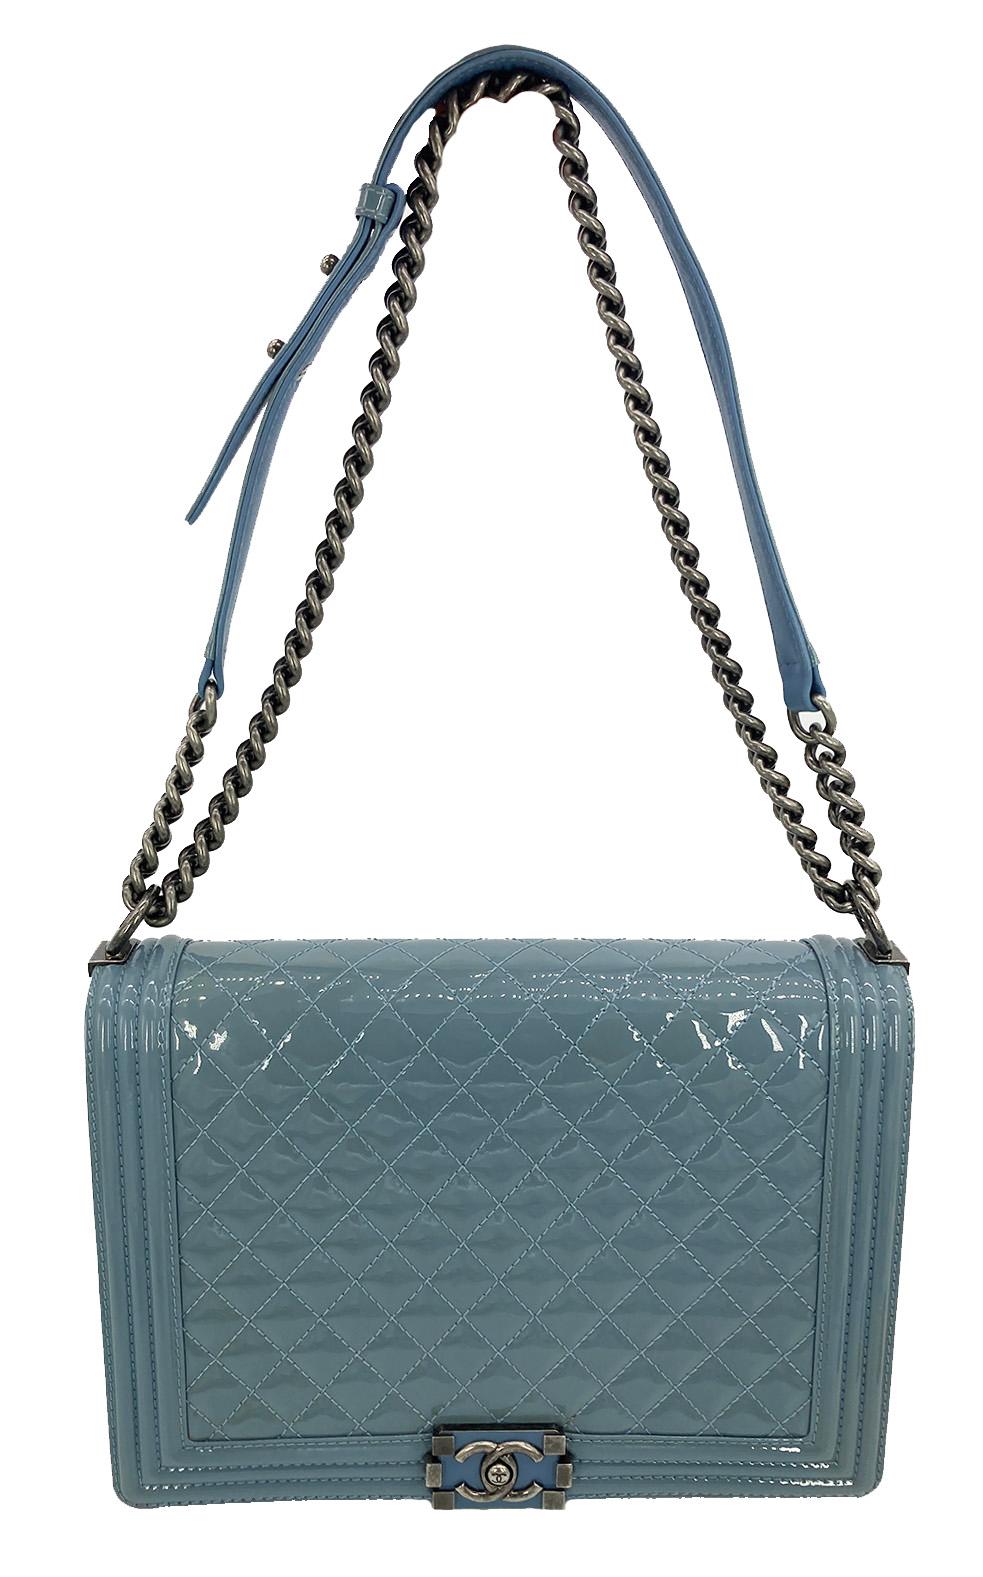 Chanel Light Blue Patent Large Boy Bag  In Good Condition For Sale In Philadelphia, PA